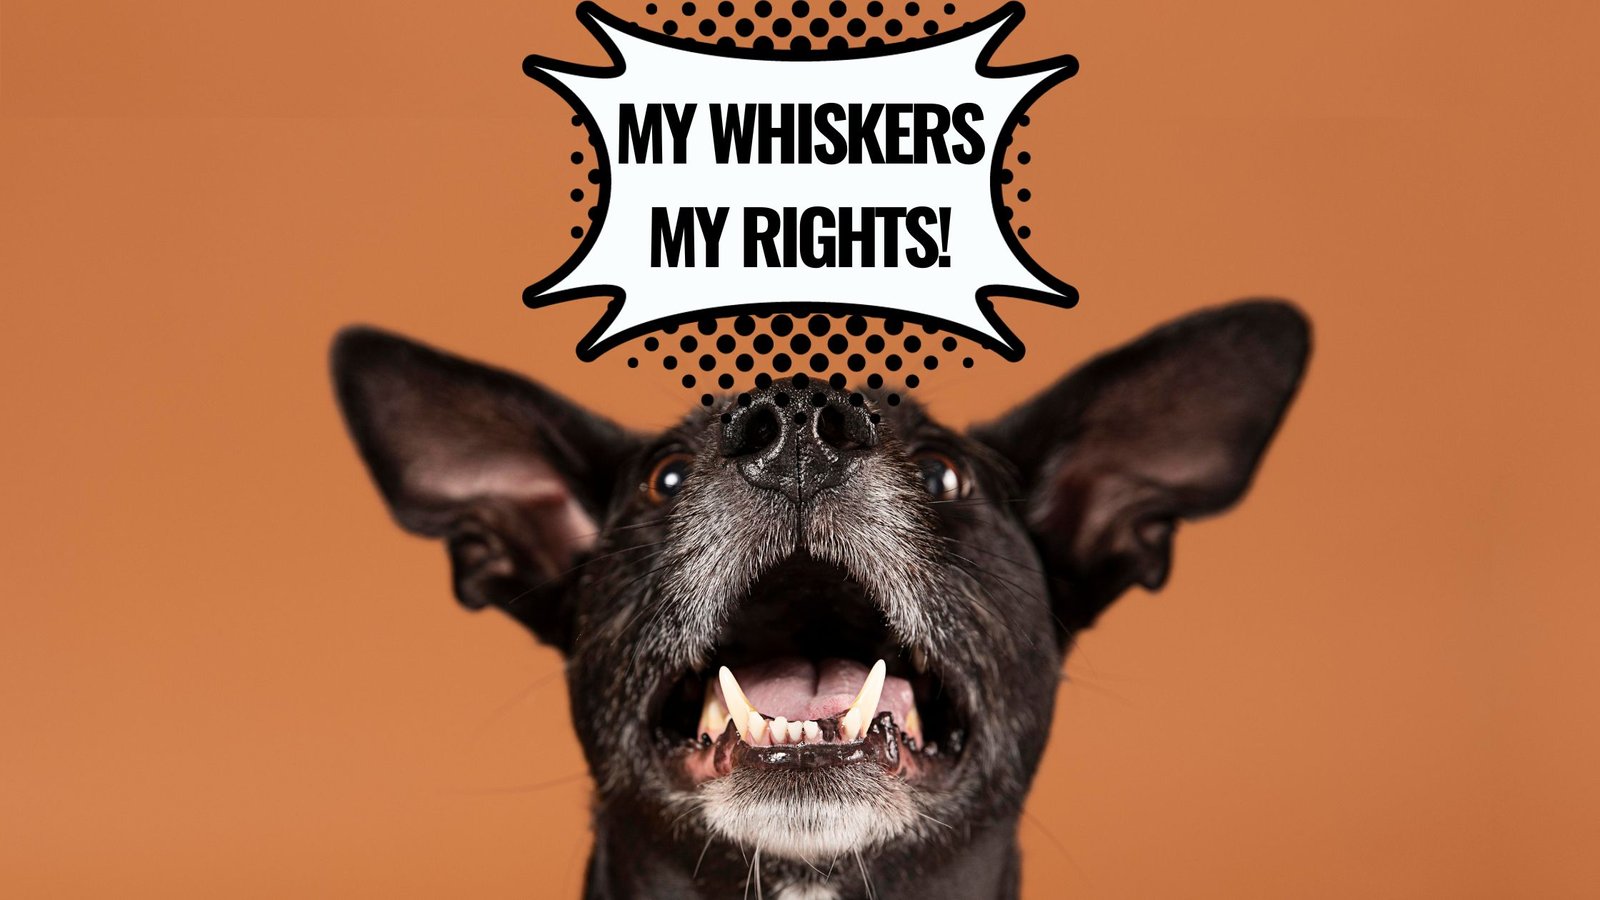 WHY DOGS HAVE WHISKERS